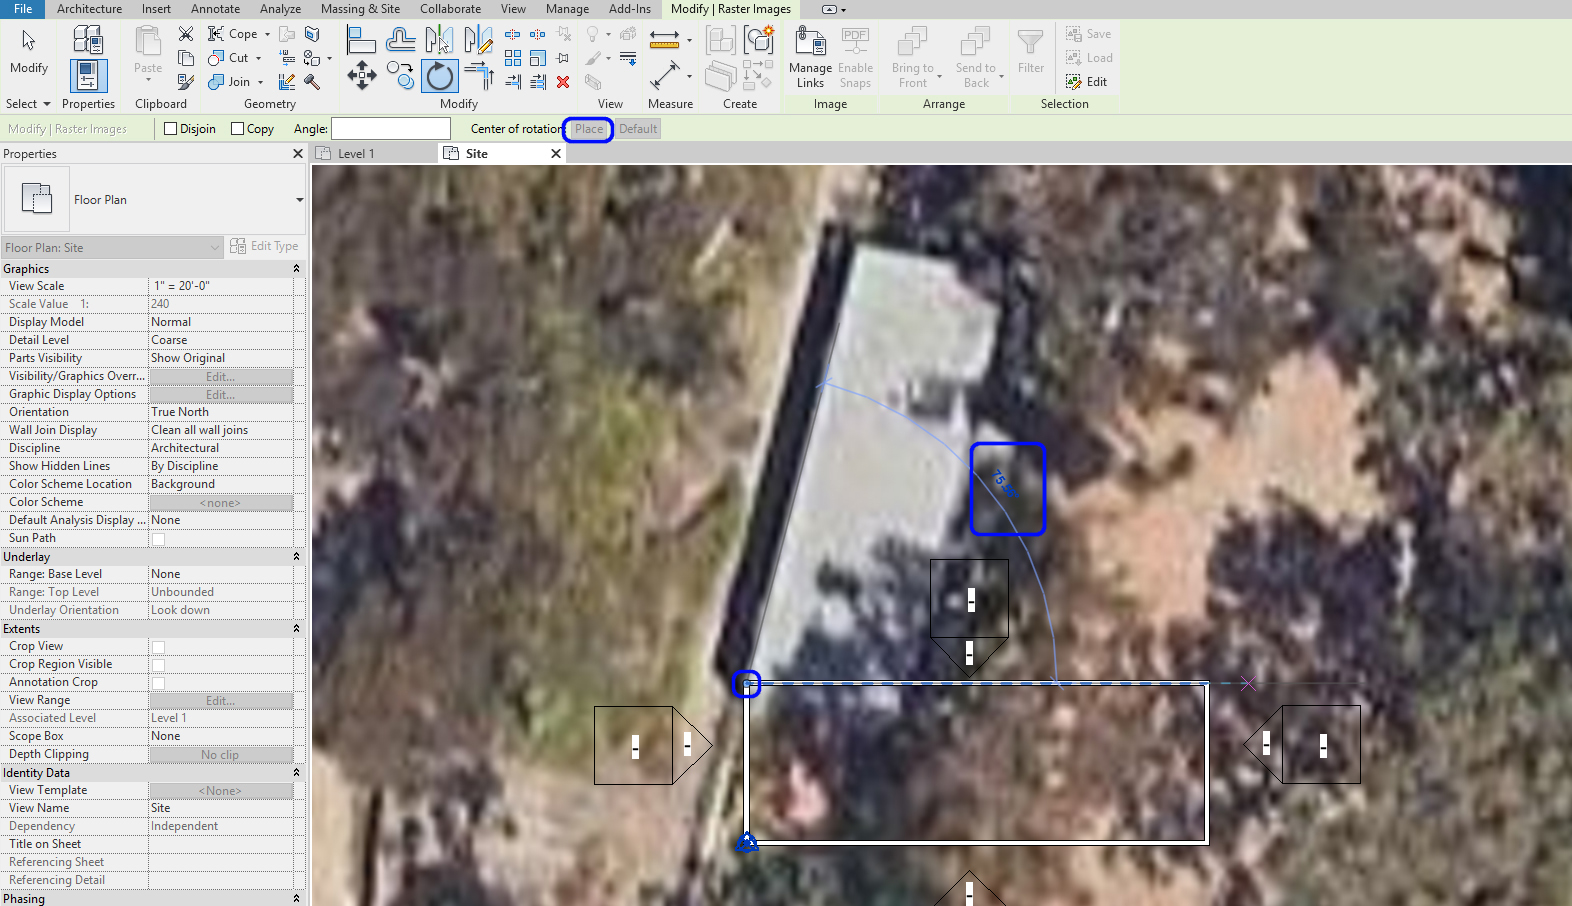 It indicates how to rotate the google maps to match the building footprint.